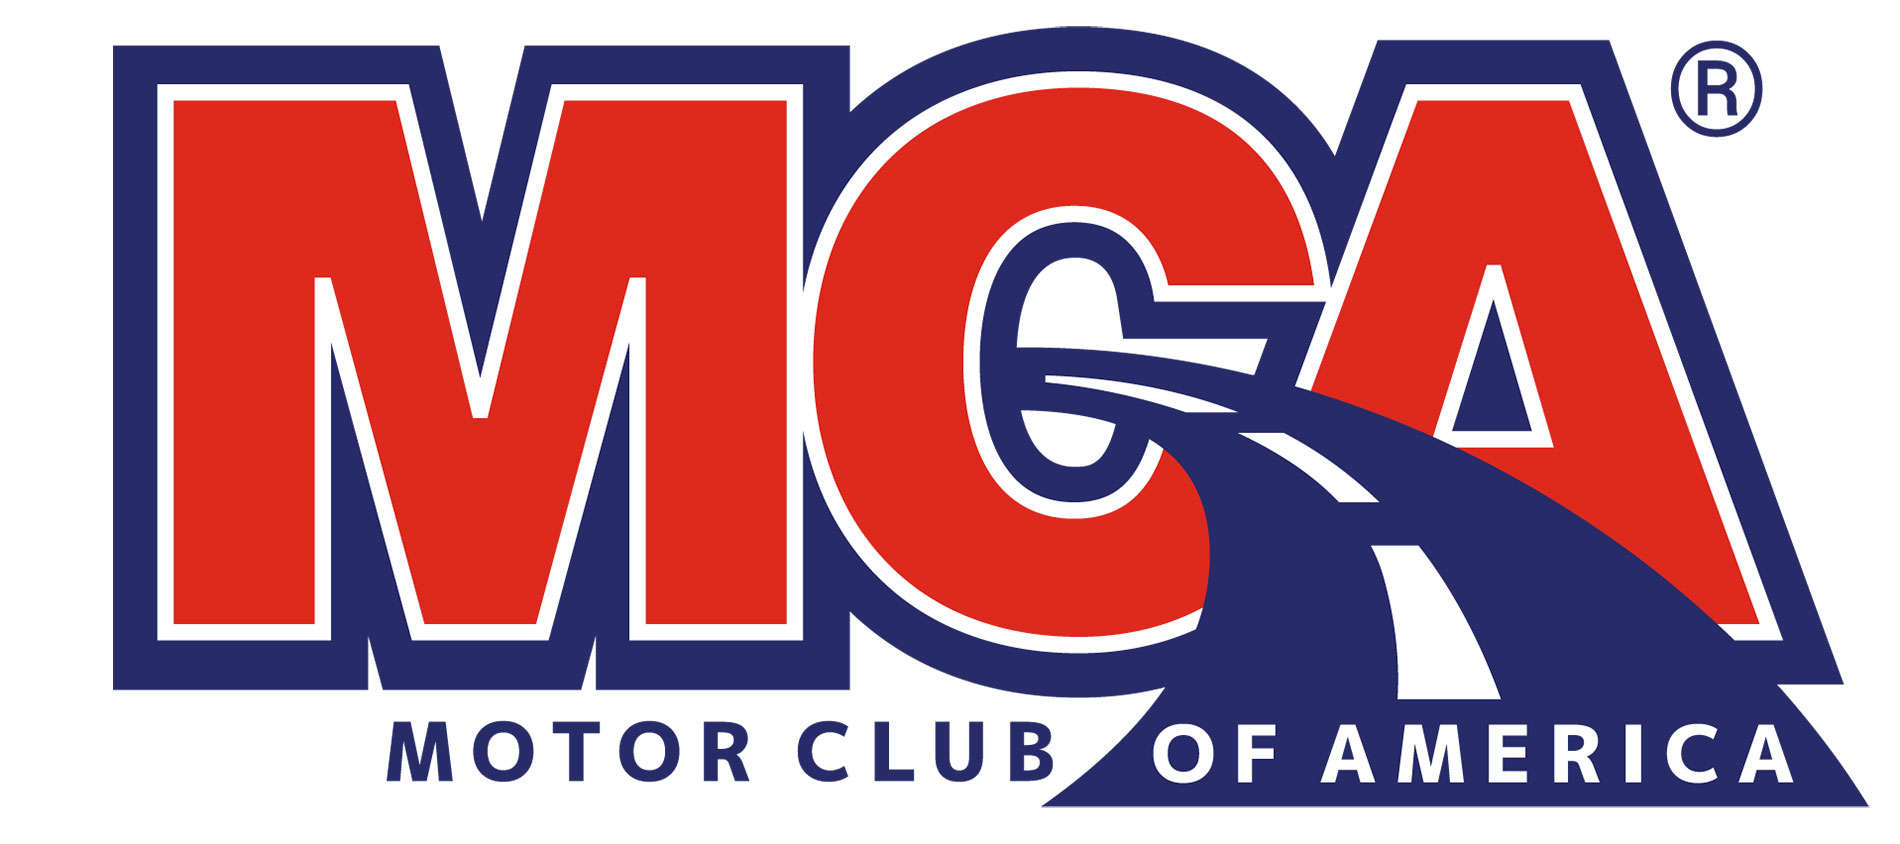 motor club of america business cards 4